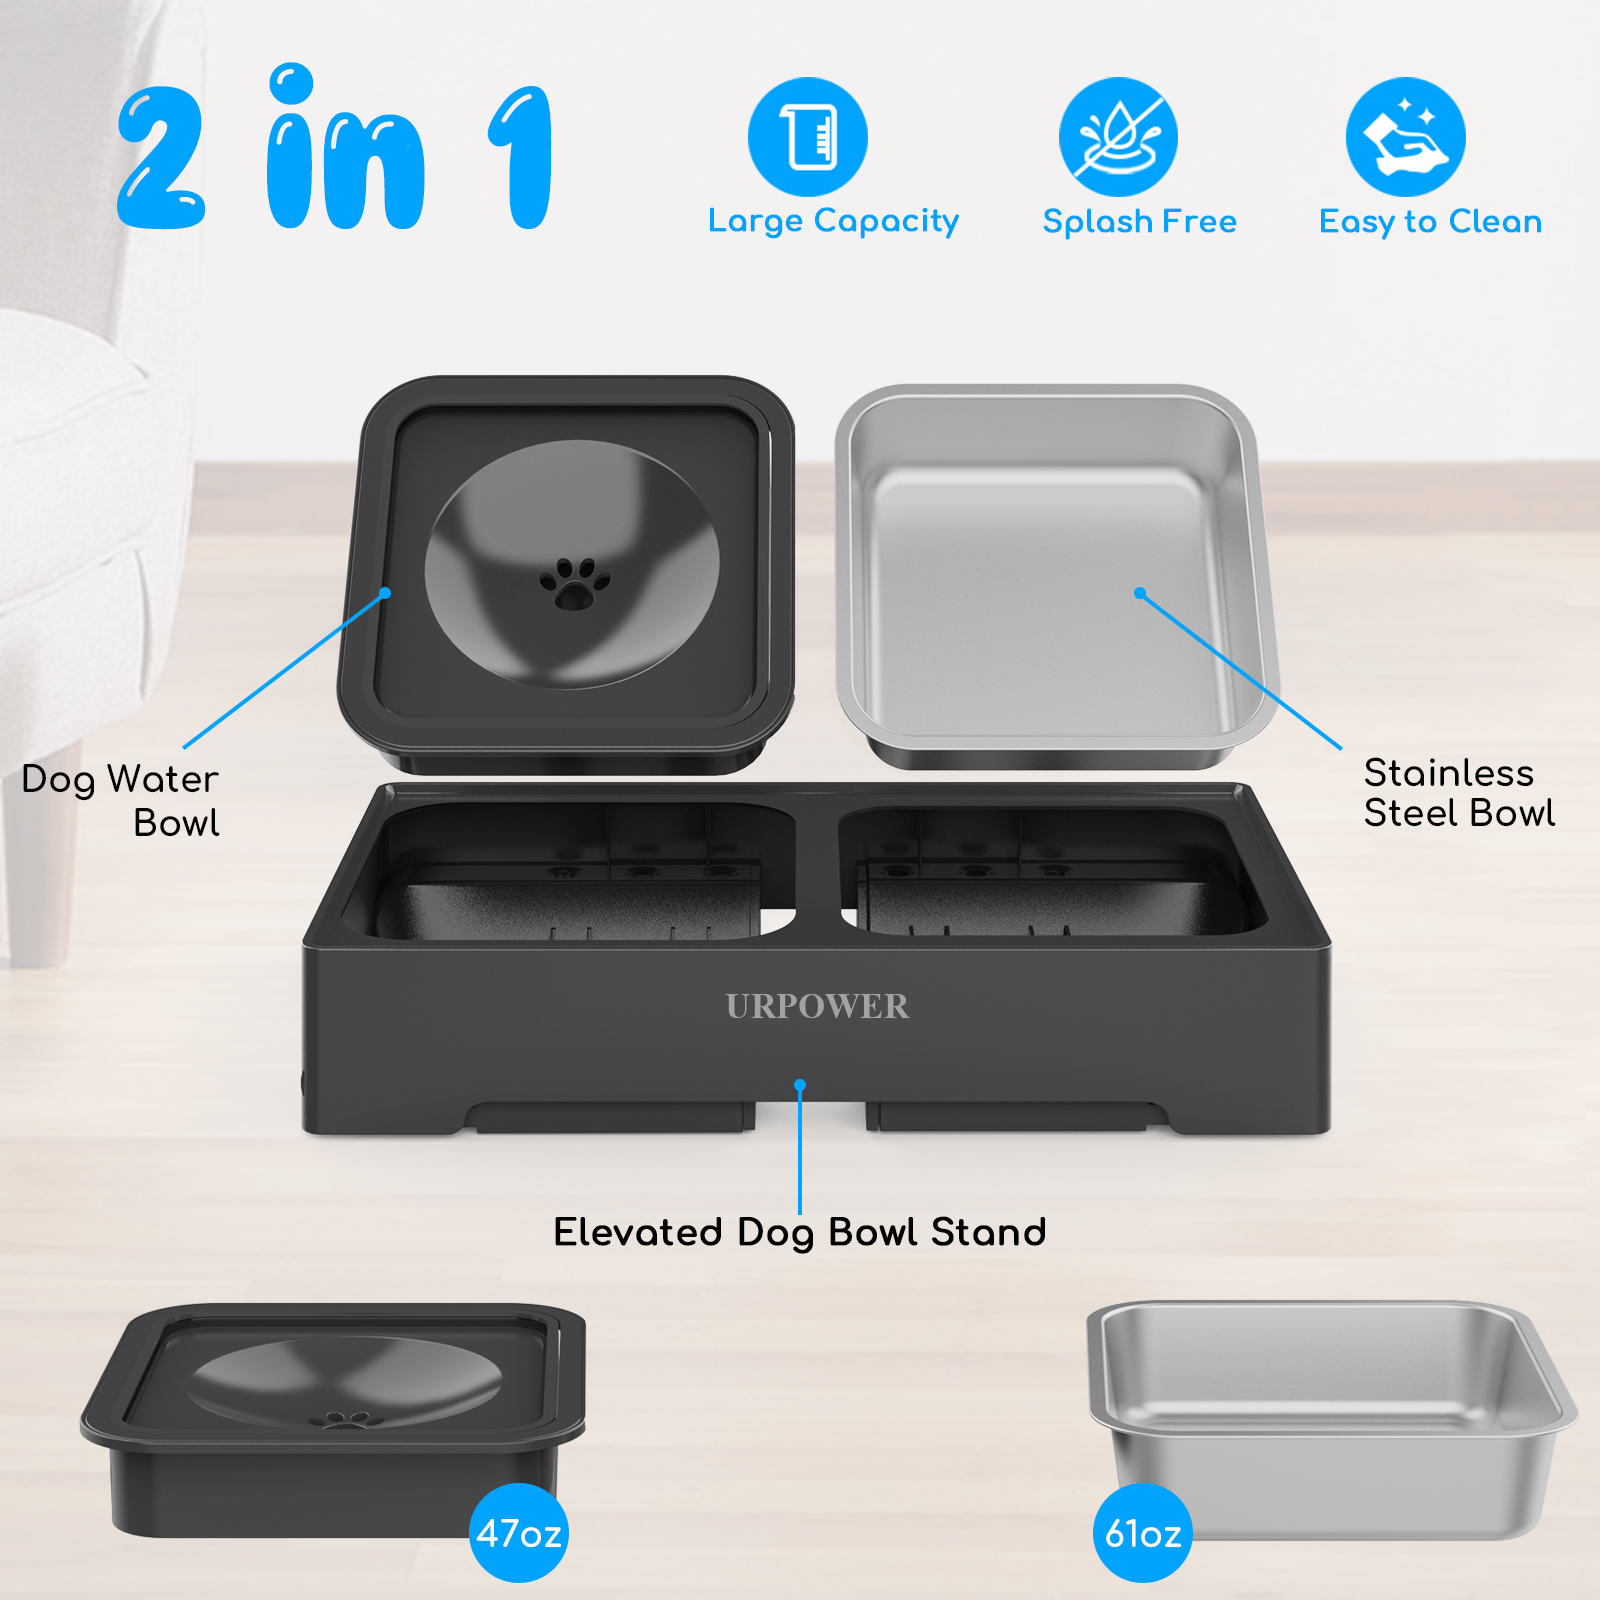 URPOWER 2-in-1 Elevated Dog Bowls 4 Height Adjustable Raised Dog Bowls with No Spill Dog Water Bowl and Stainless Steel Dog Food Bowl Non-Slip Dog Bowl Stand for Small Medium Large Dogs, Cats & Pets